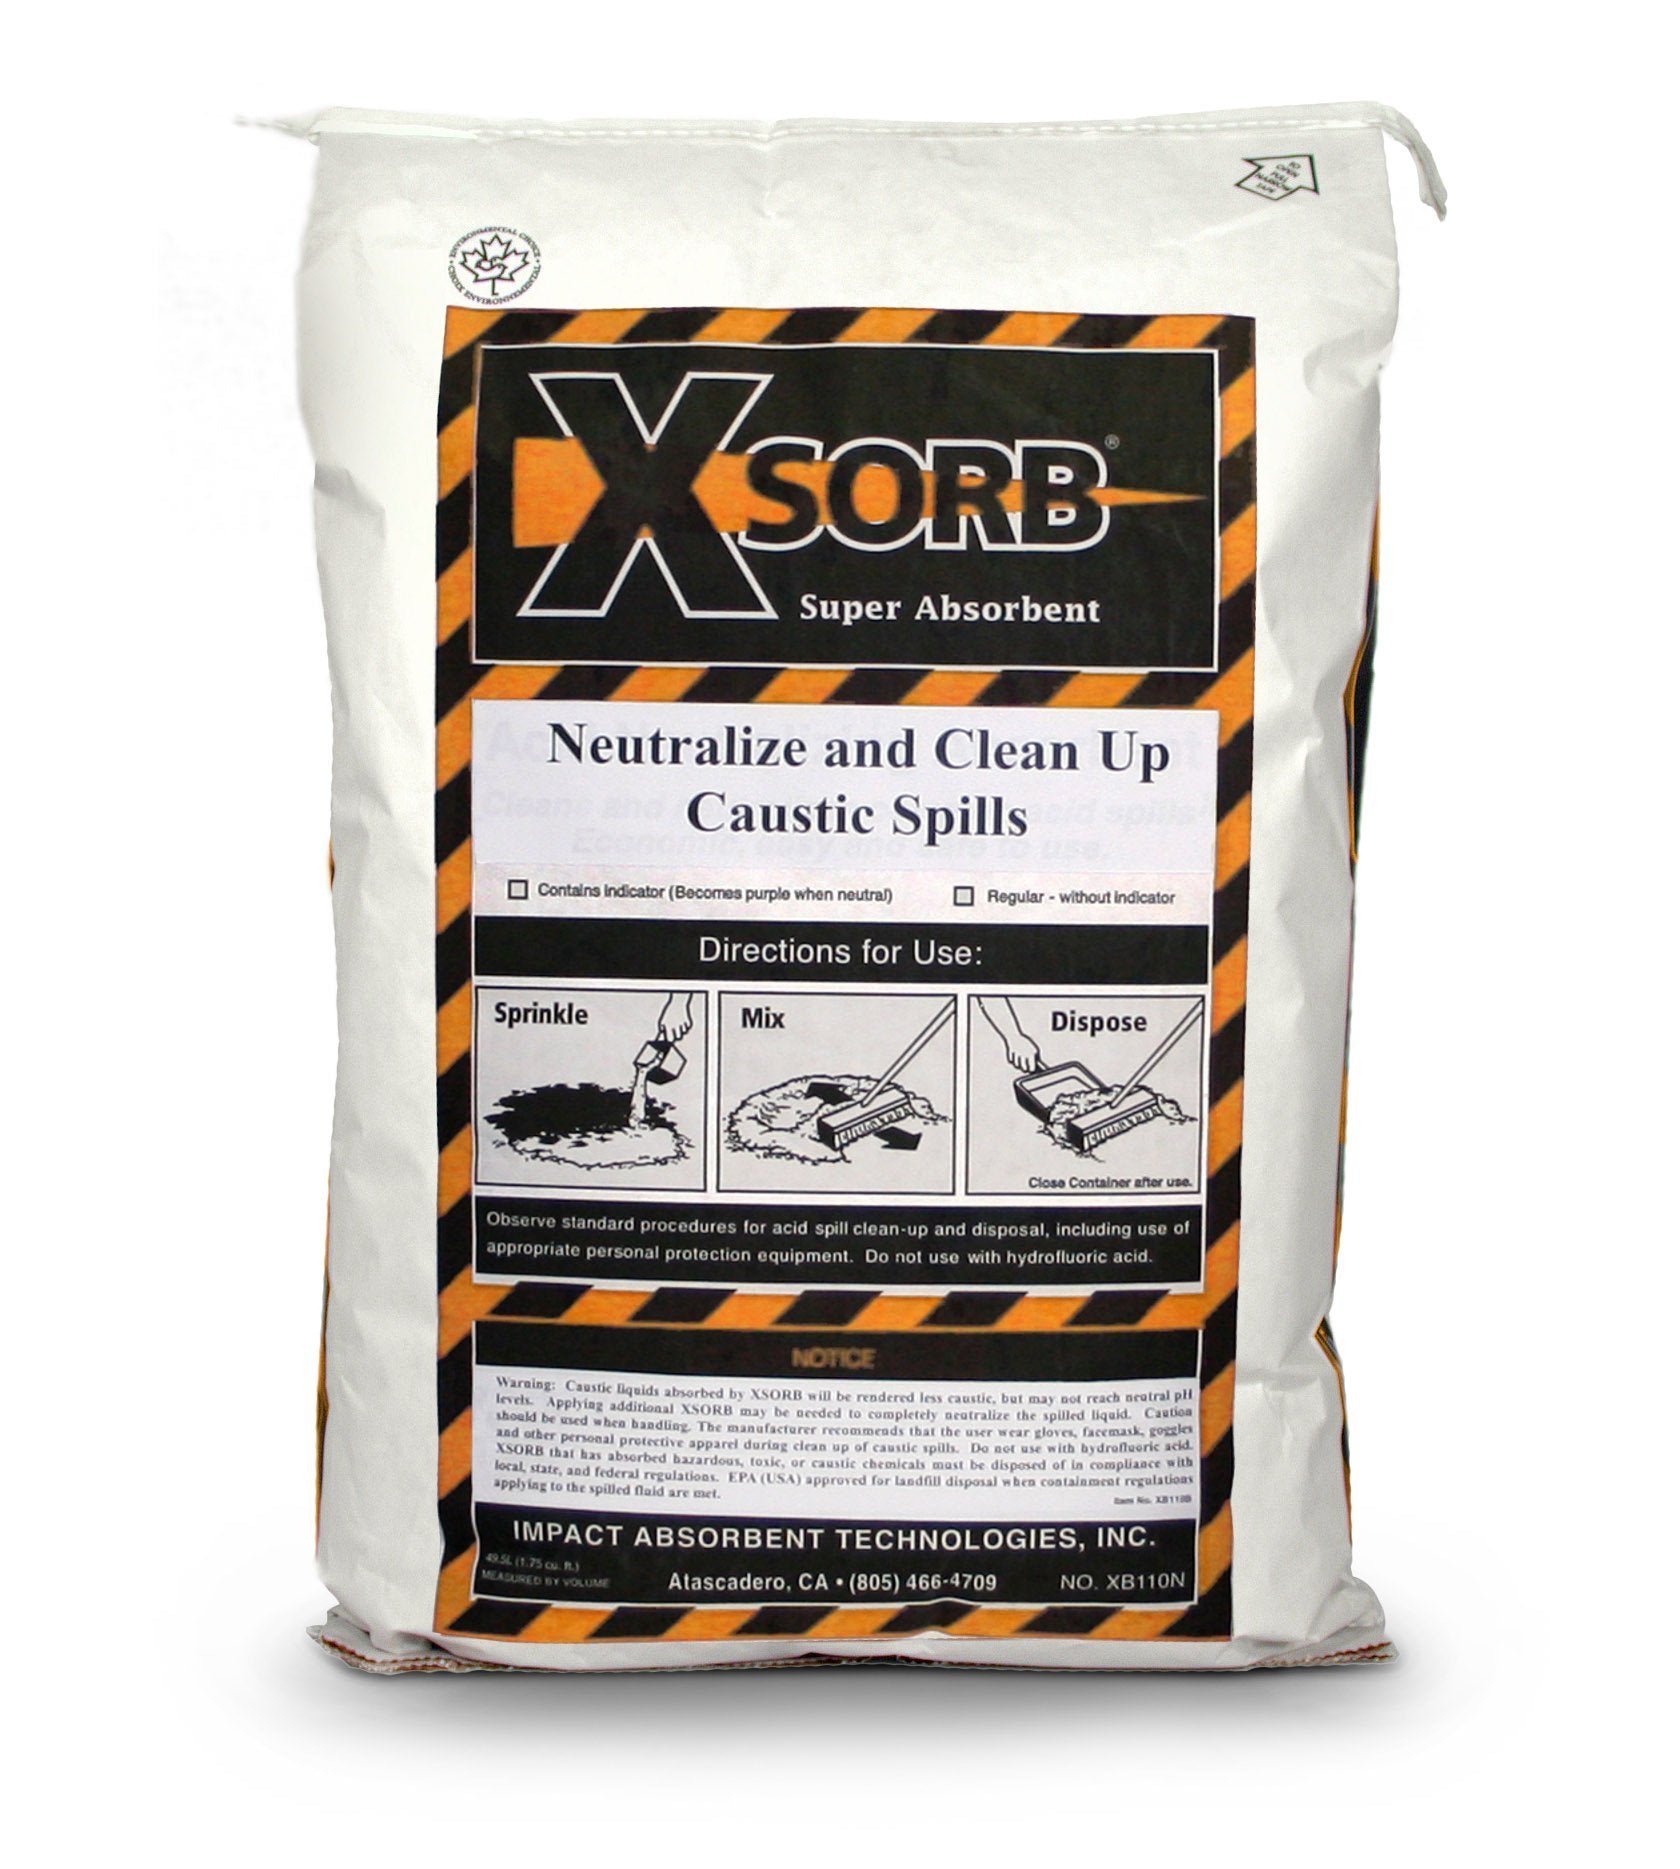 XSORB Caustic Neutralizing Absorbent Bag 1.75 cu. ft. - 1 BAG-eSafety Supplies, Inc